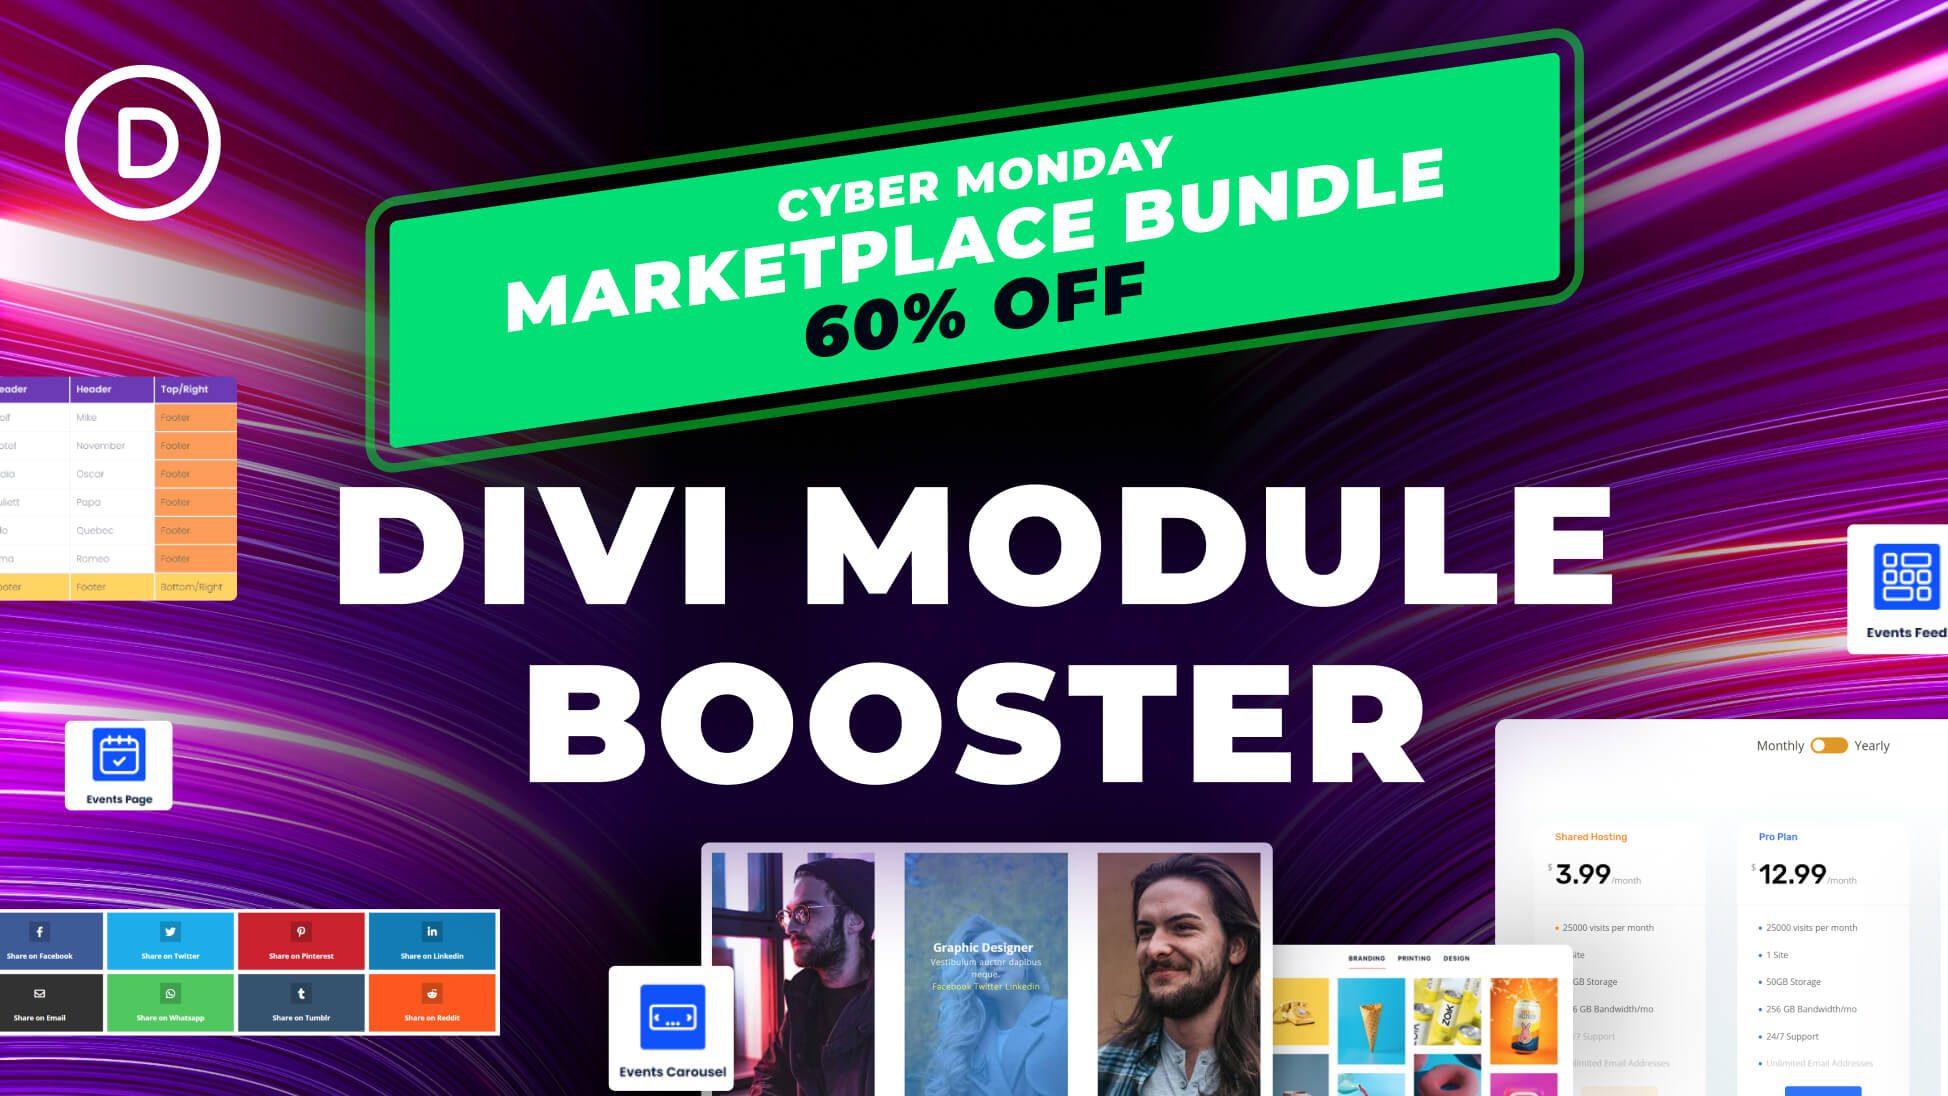 Introducing the NEW Divi Cyber Monday Module Booster Bundle